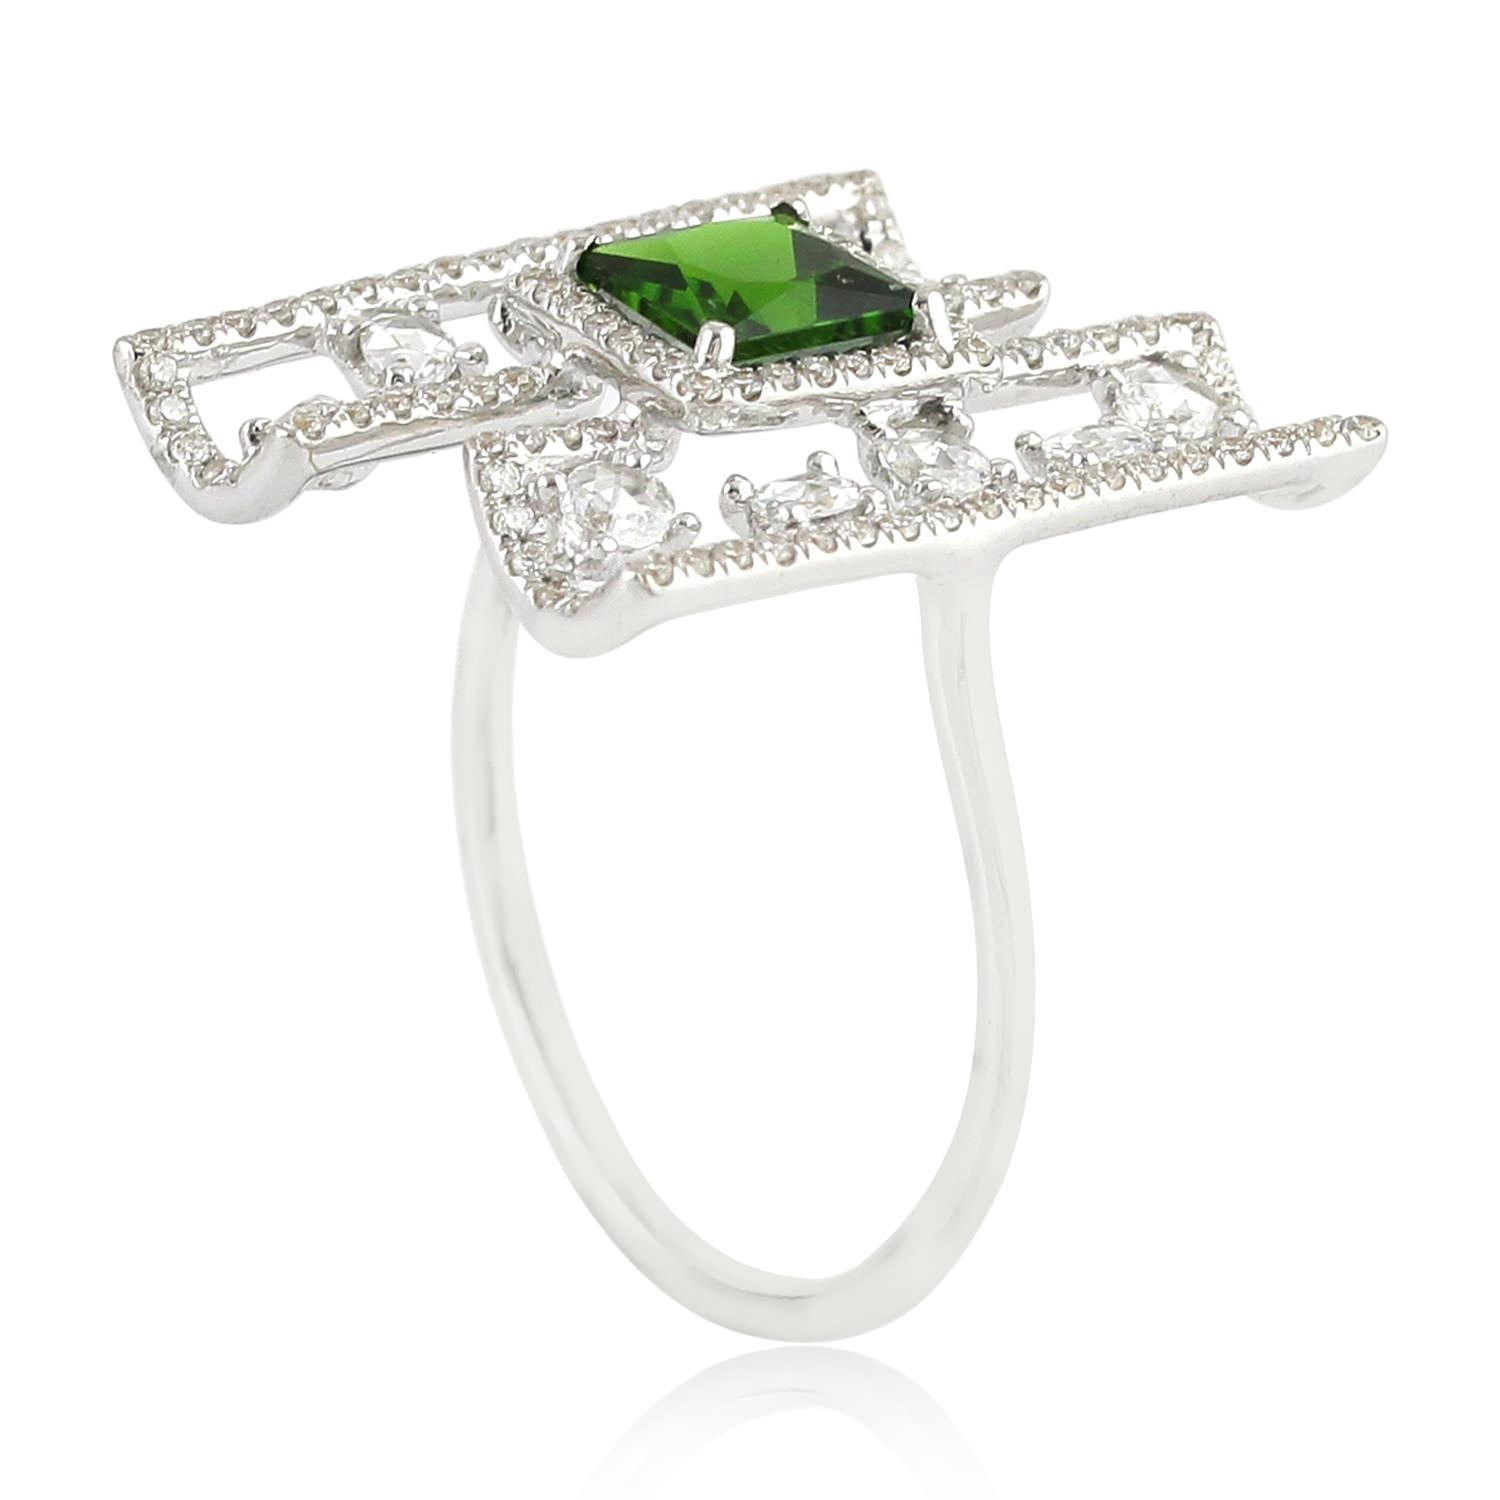 Mixed Cut Chrome Diopside Cocktail Ring With Diamonds Made In 18k White Gold For Sale